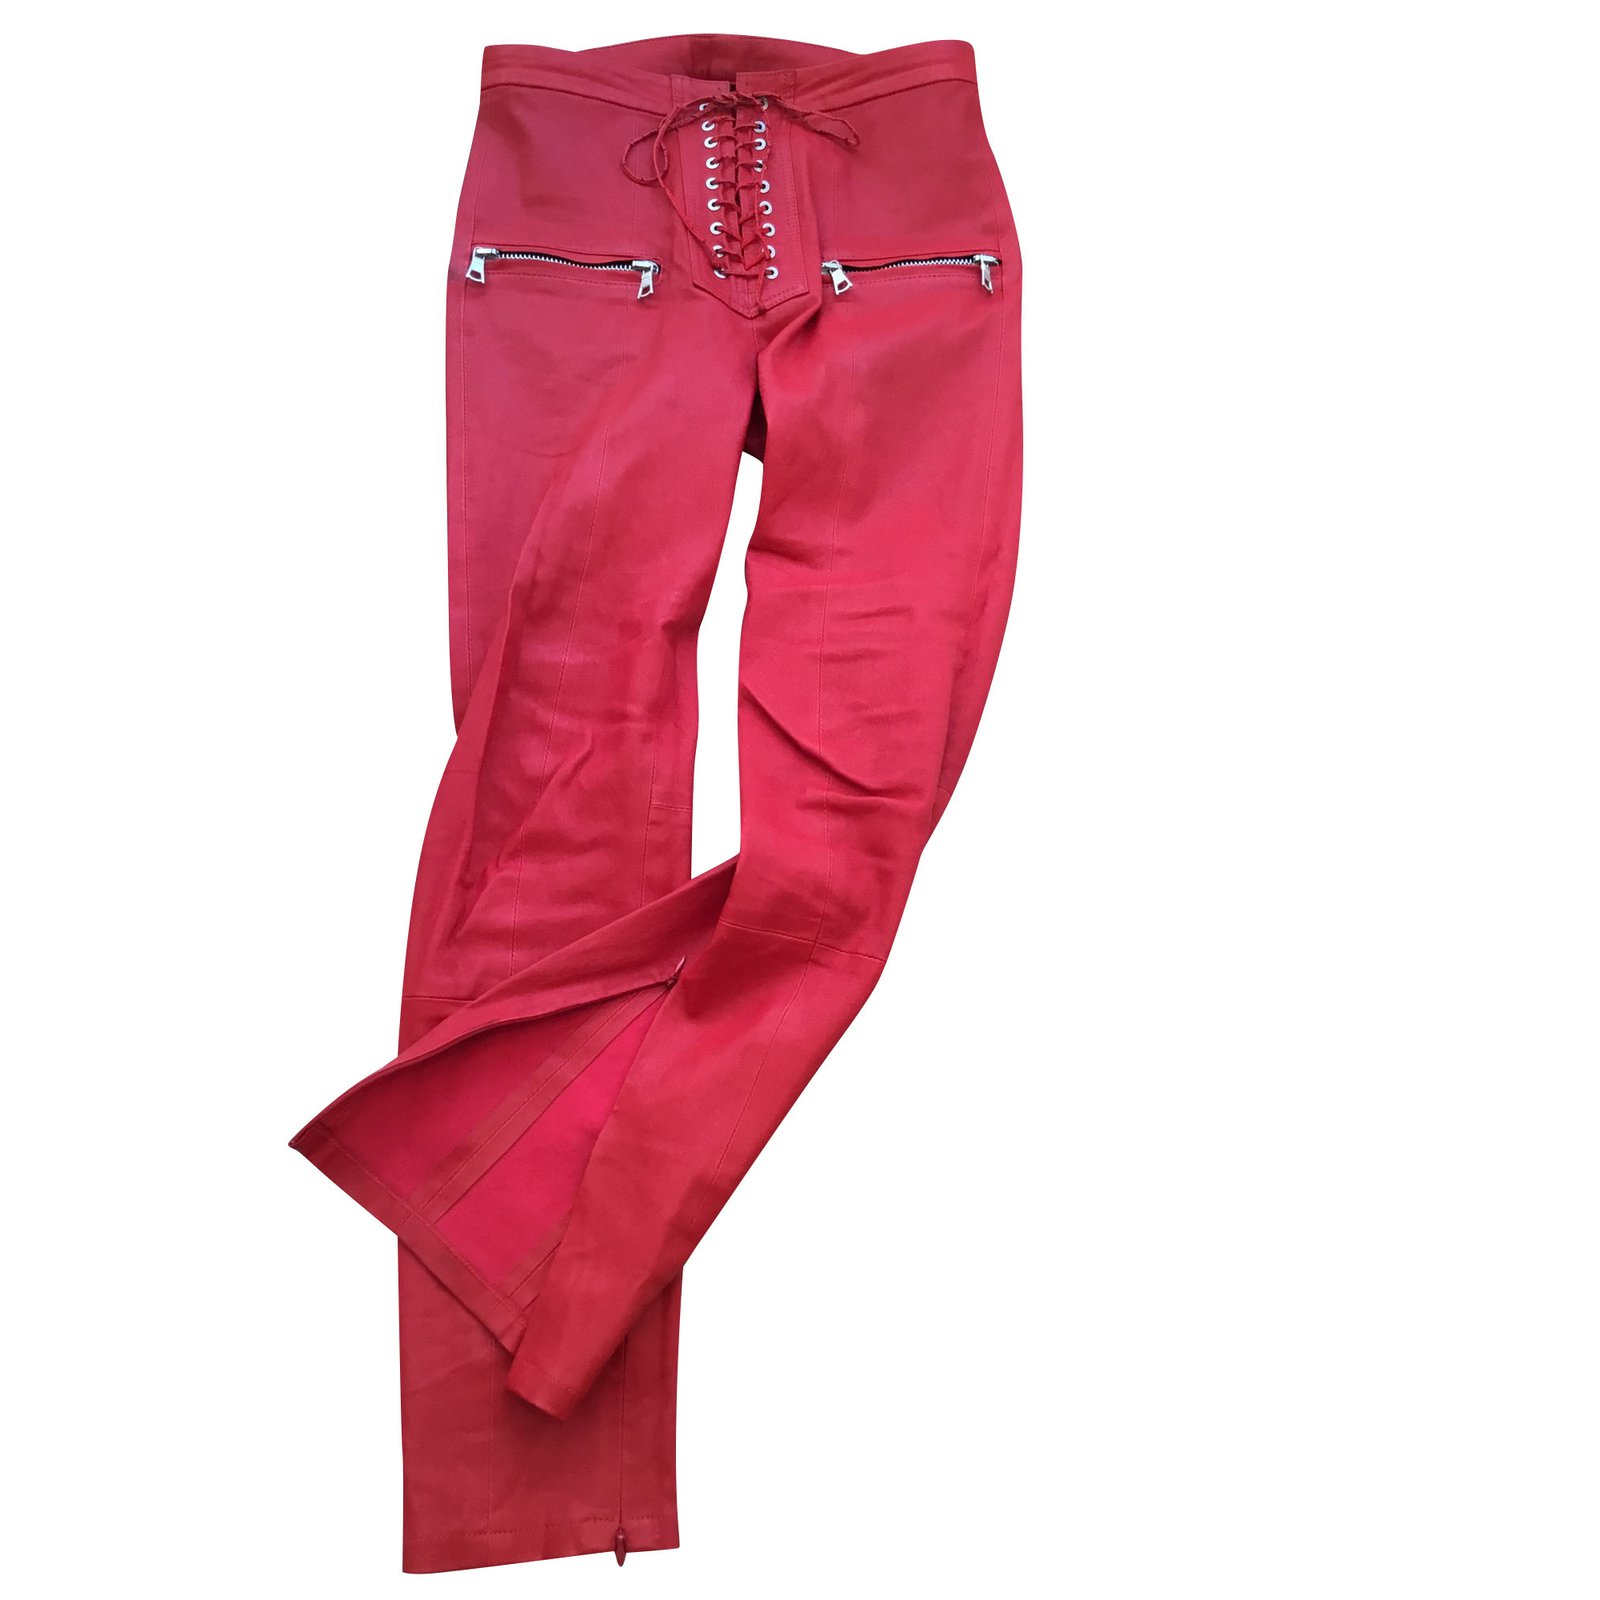 red lace up leather pants